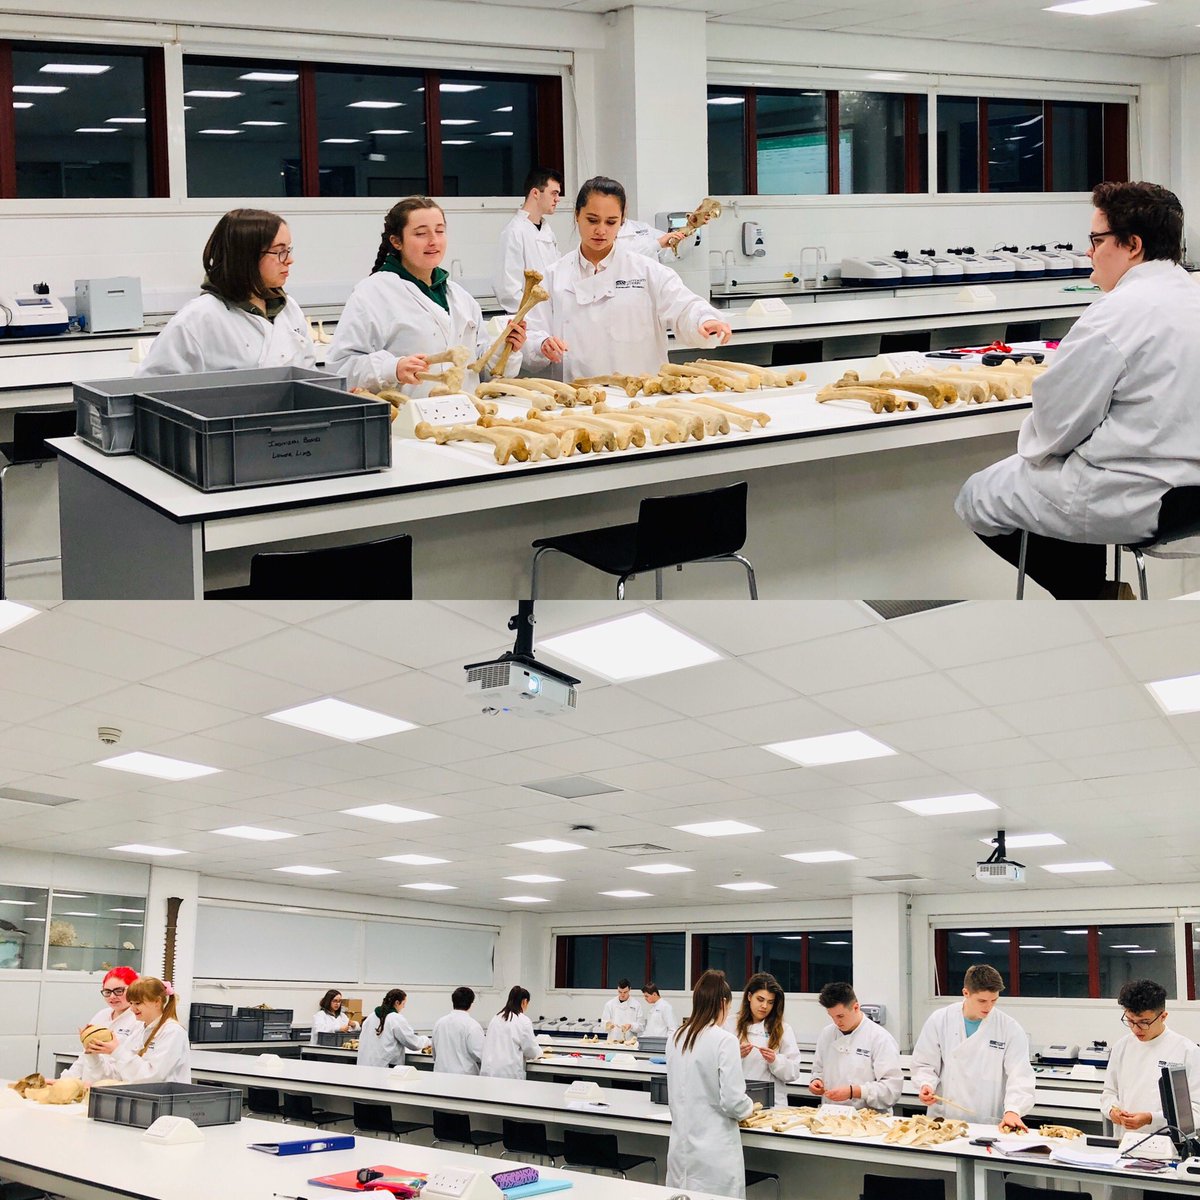 MNI lab session for our budding anthropologists today - hands-on bone counting and debating how many individuals make up our anatomy collection (and whether some really were having an unusual no of limbs)... #handsonlearning @DerbyUni #forensicanthropology #practicemakesperfect